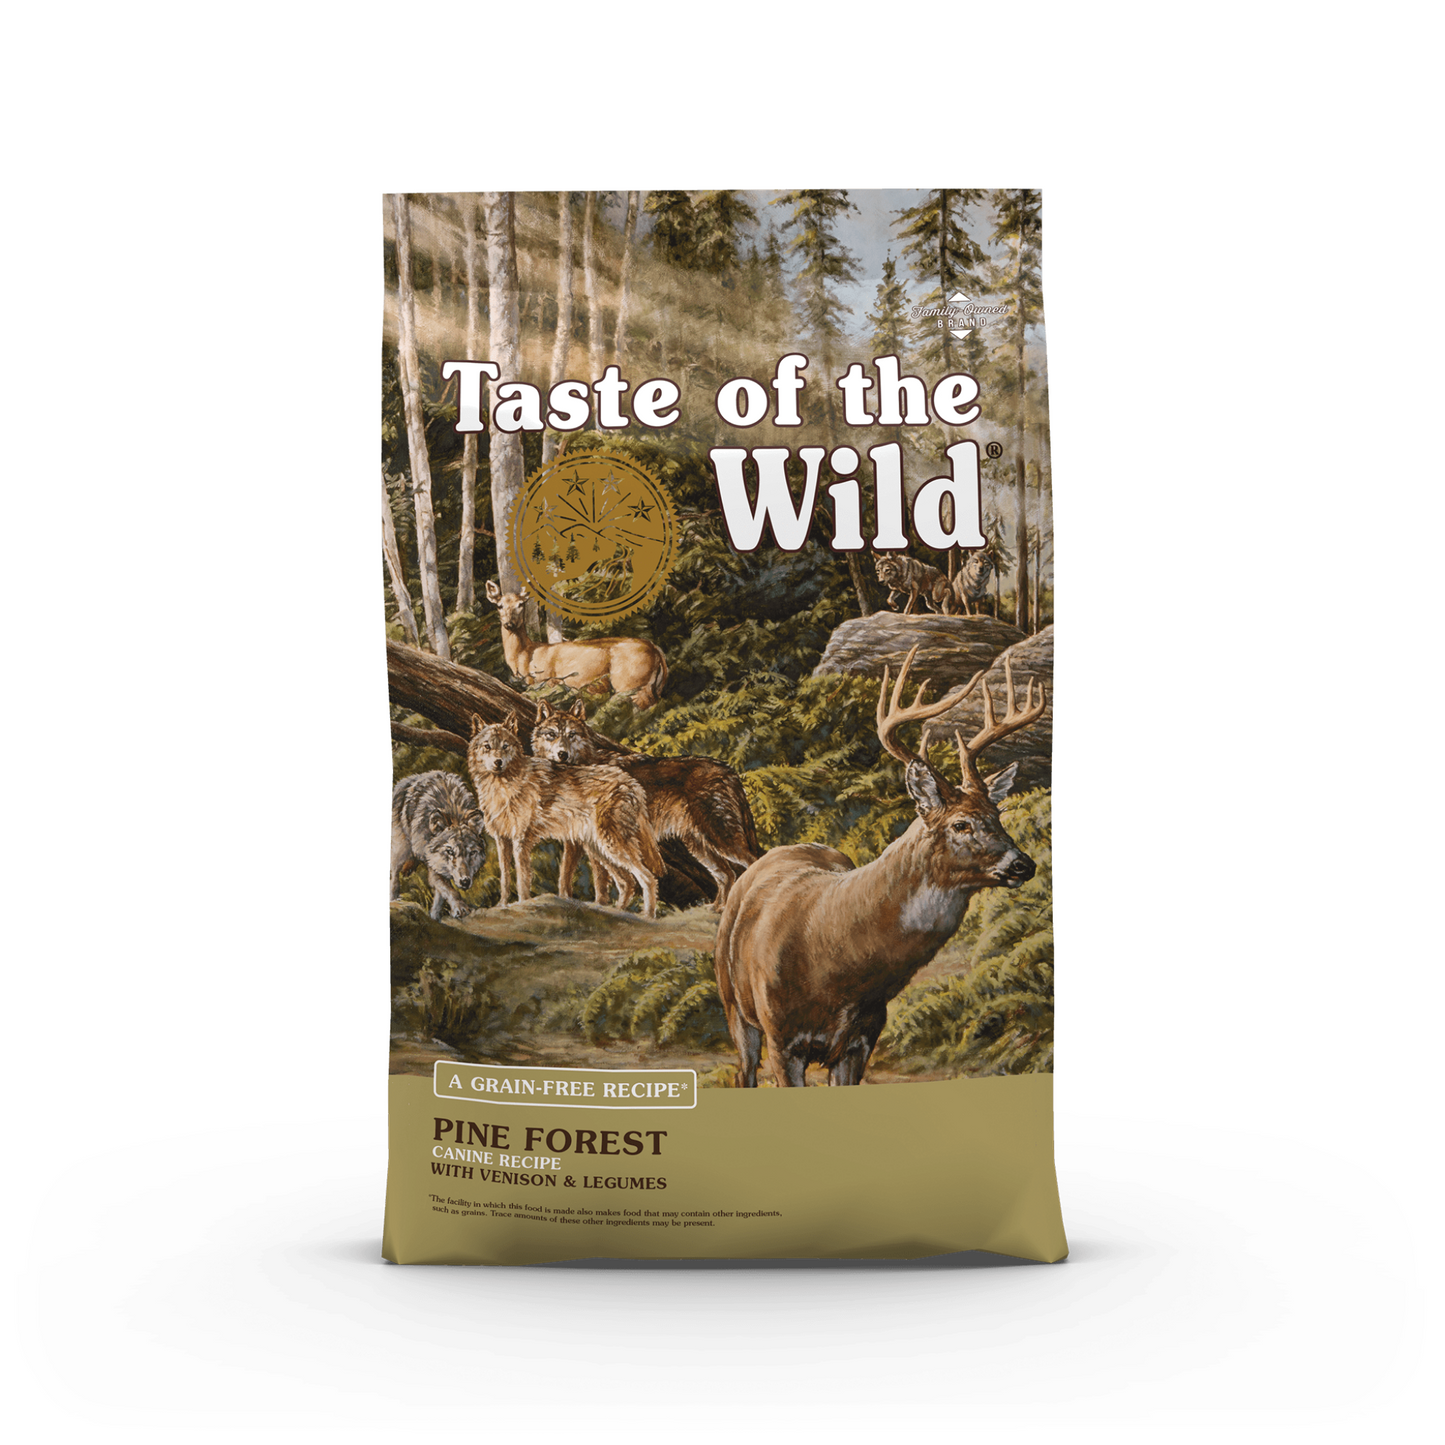 Taste of the Wild Pine Forest with Venison & Legumes